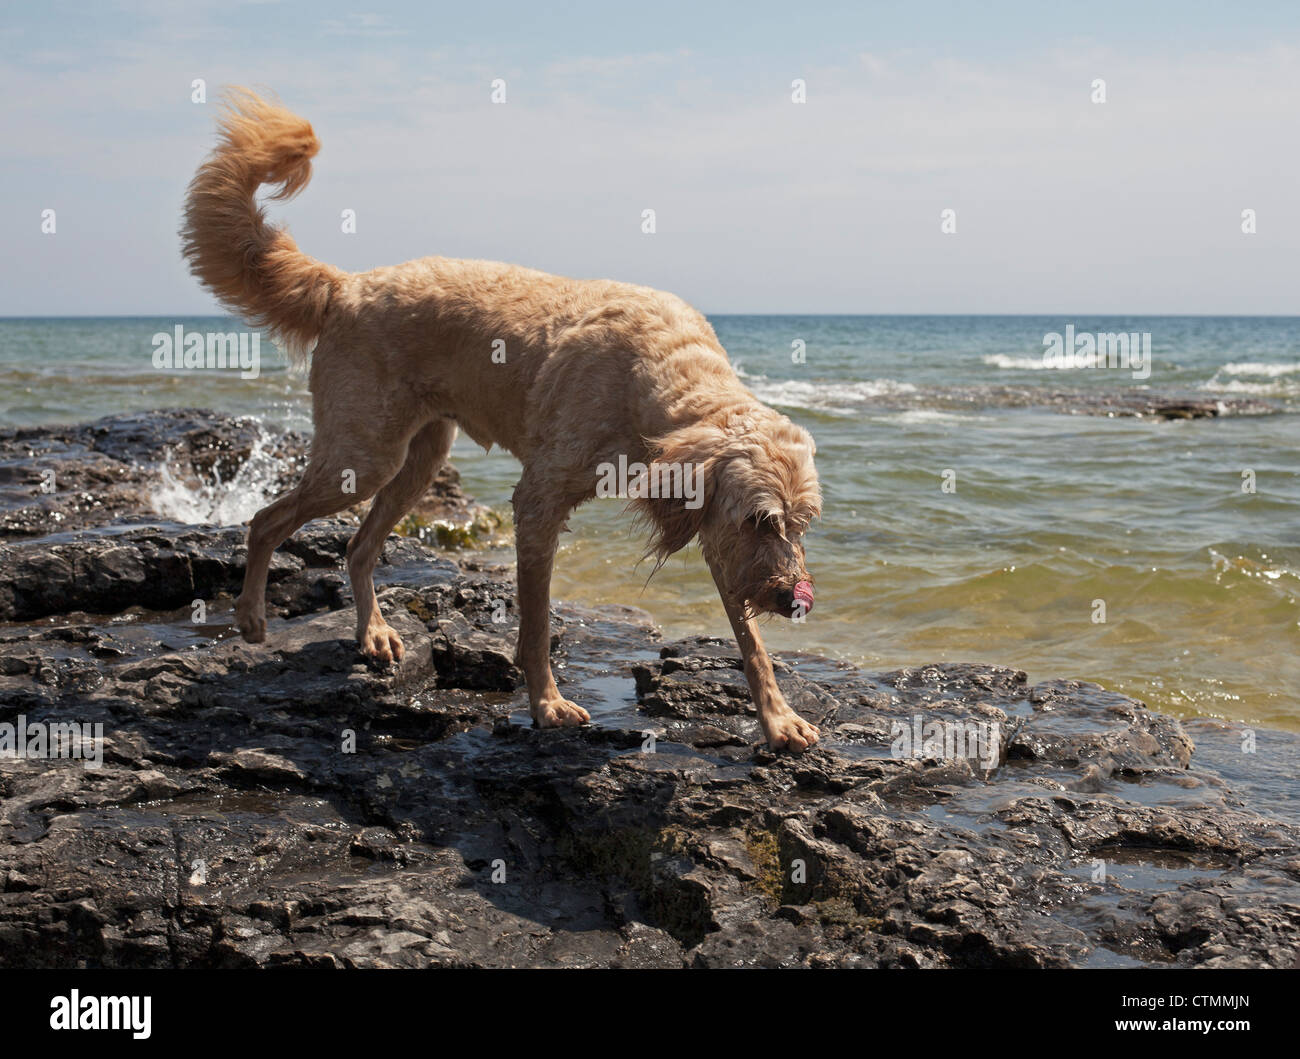 A goldendoodle watches the water from a rock in Lake Michigan. Stock Photo